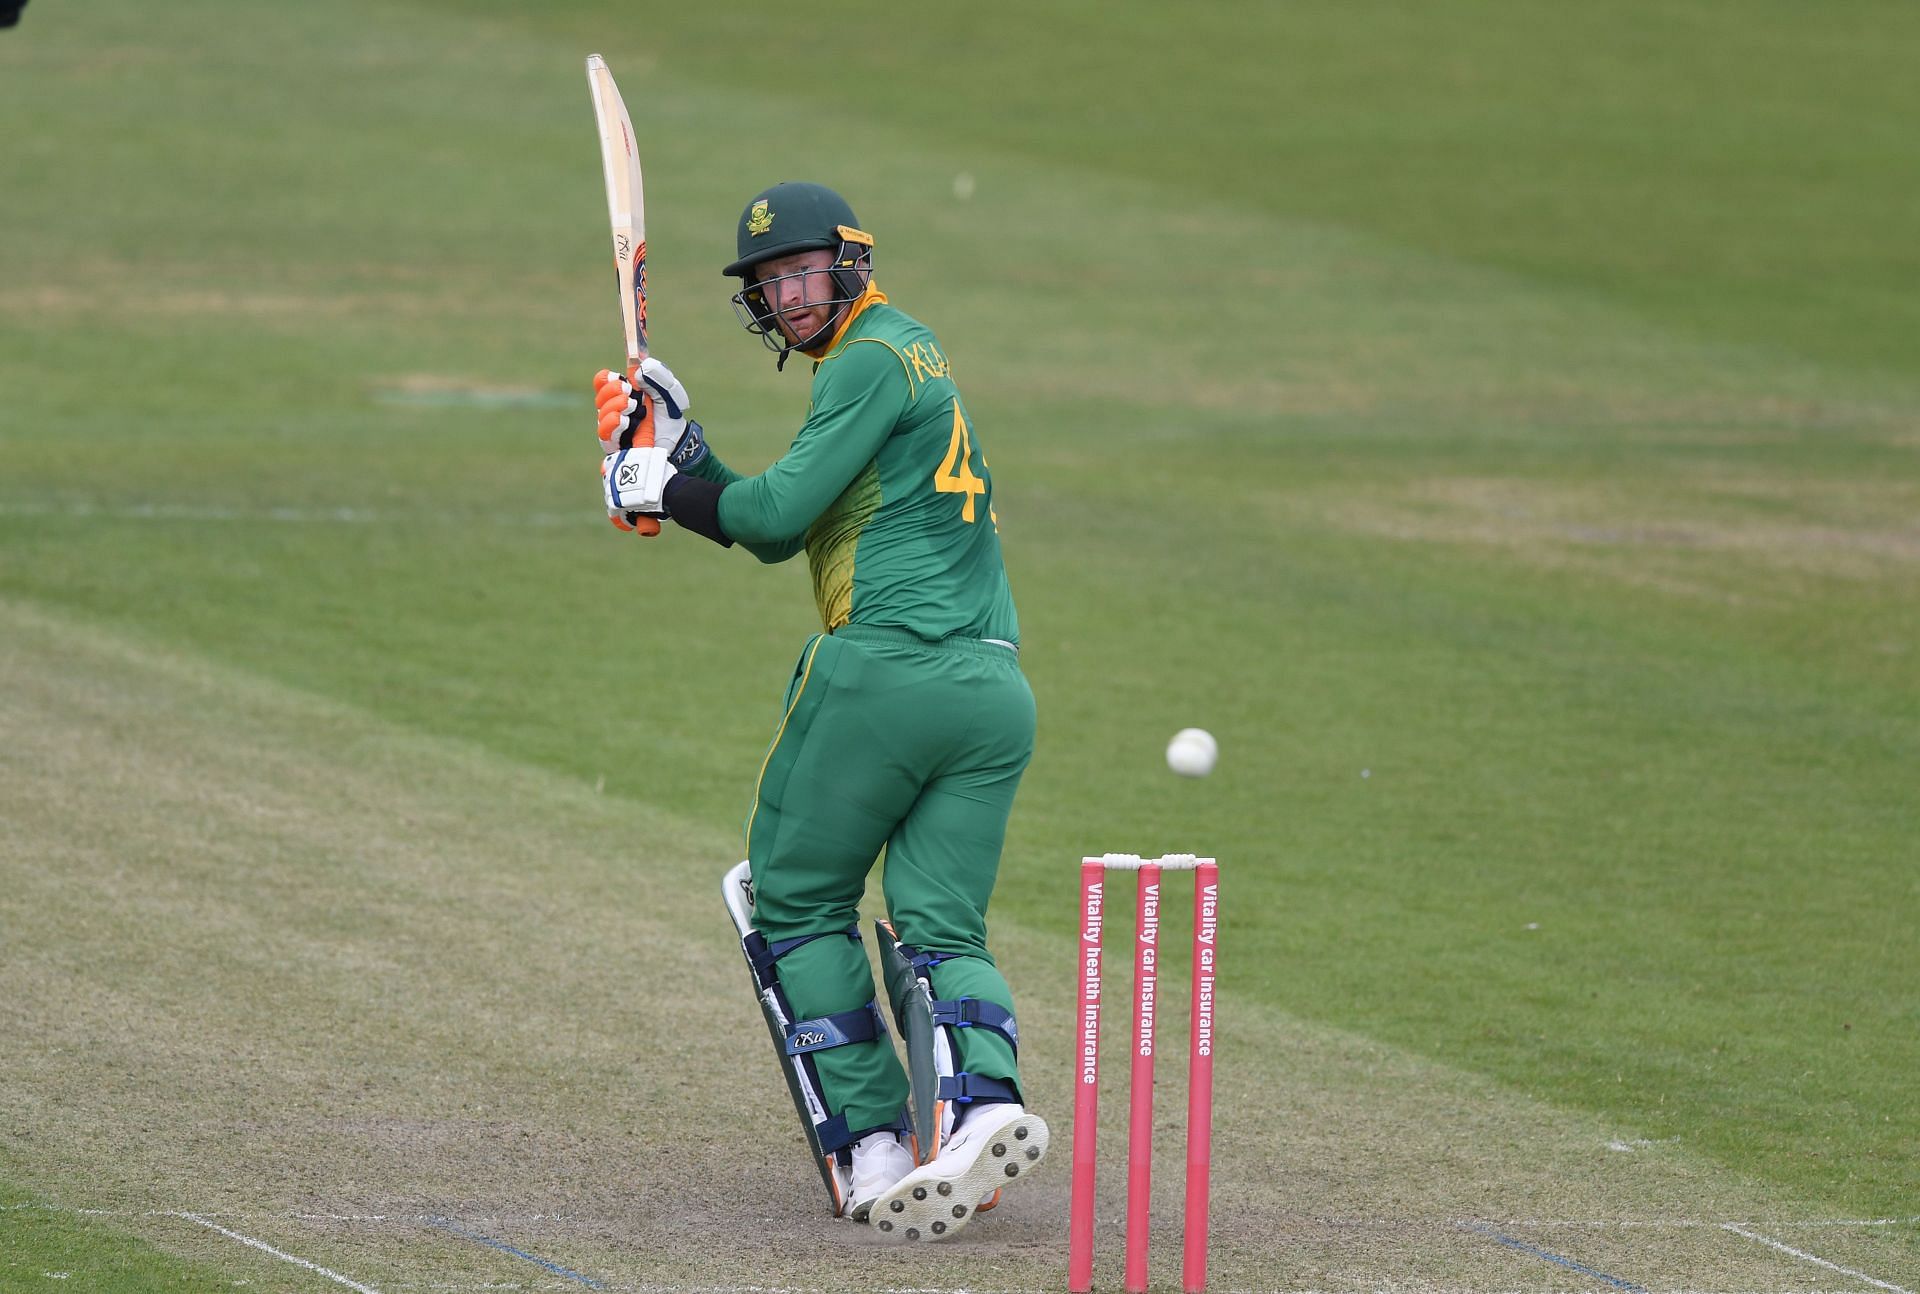 Heinrich Klaasen could feature regularly in IPL 2023 as SRH&#039;s wicket-keeper.